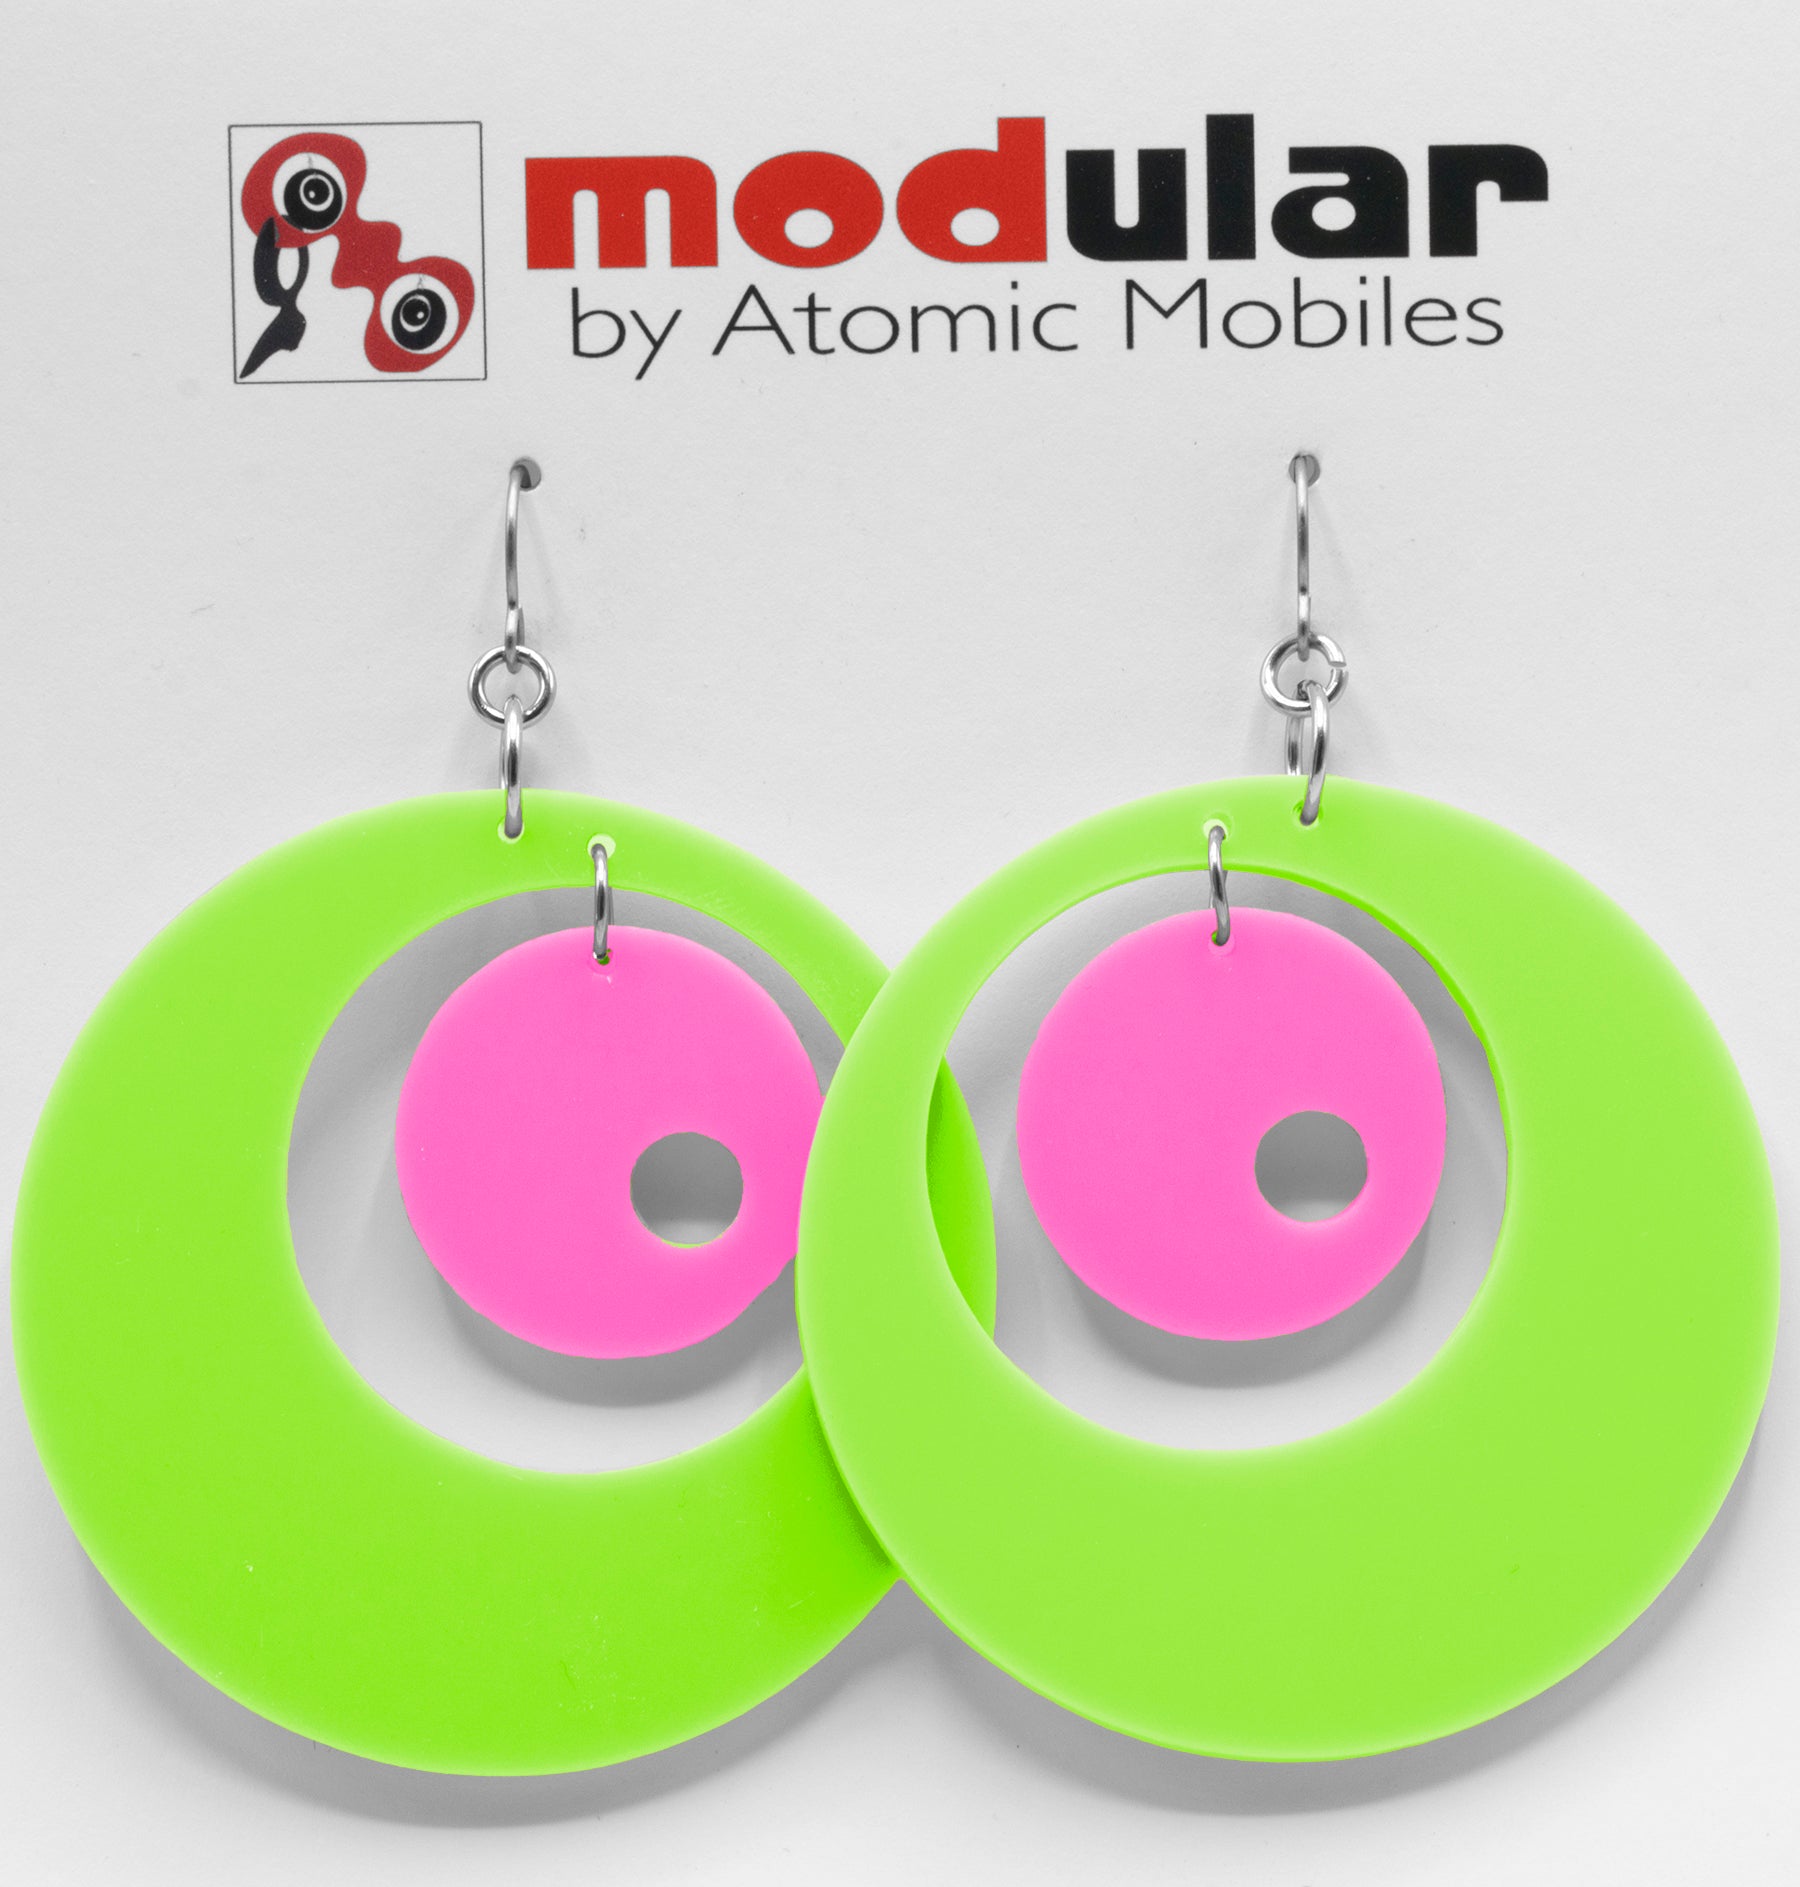 MODular Earrings - Groovy Statement Earrings in Lime and Hot Pink by AtomicMobiles.com - retro era inspired mod handmade jewelry